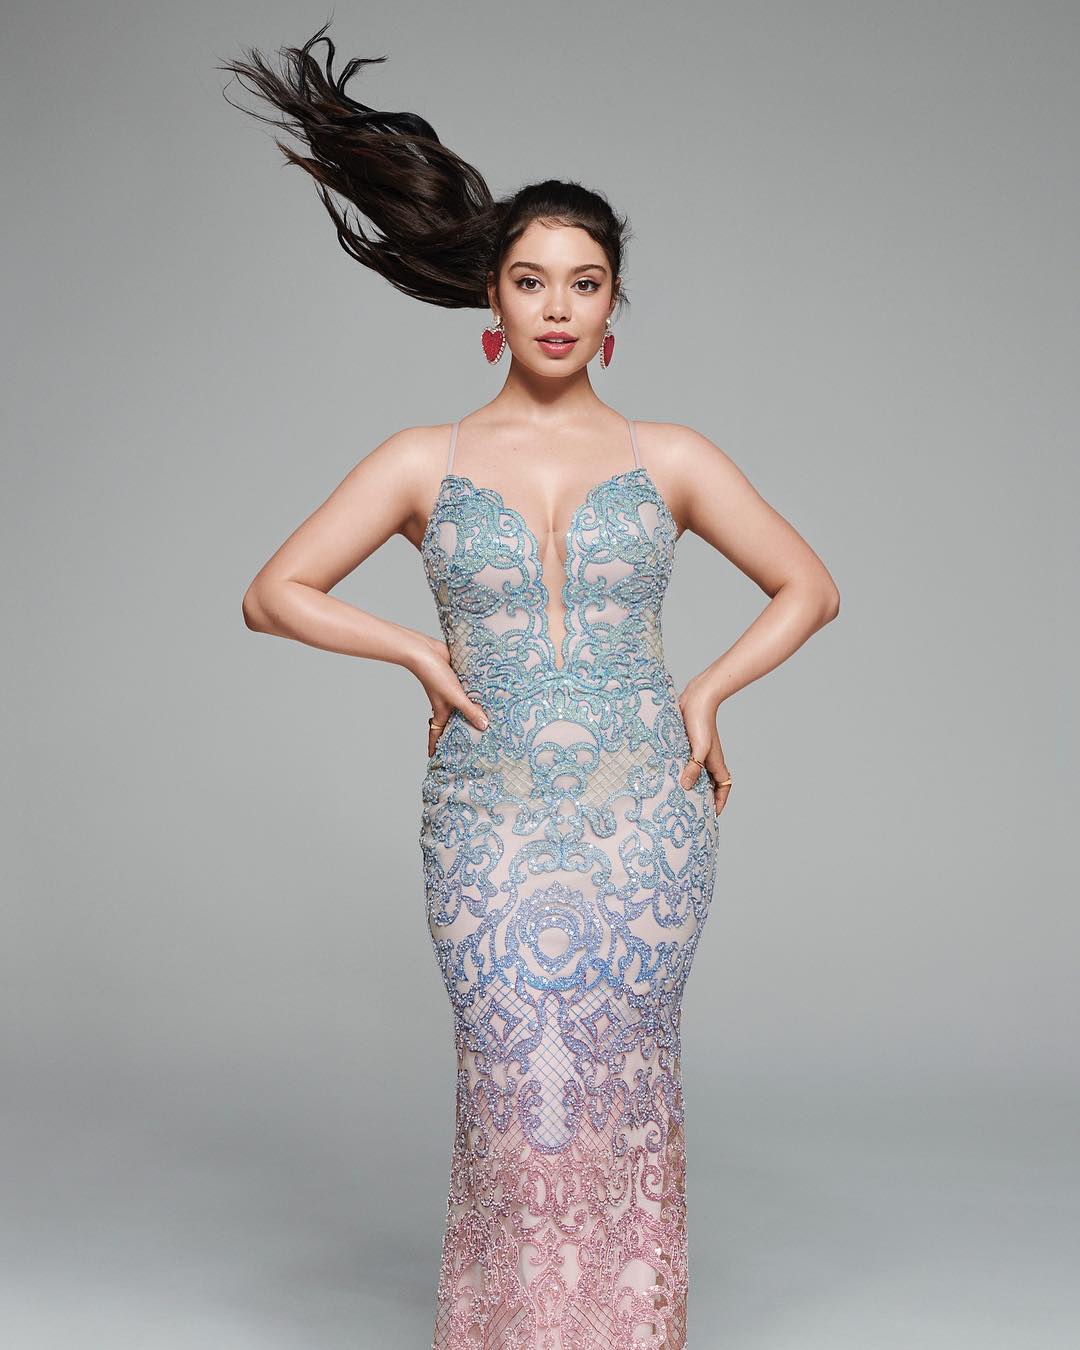 49 Hot Pictures Of Auli’i Cravalho Which Are Here To Rock Your World | Best Of Comic Books